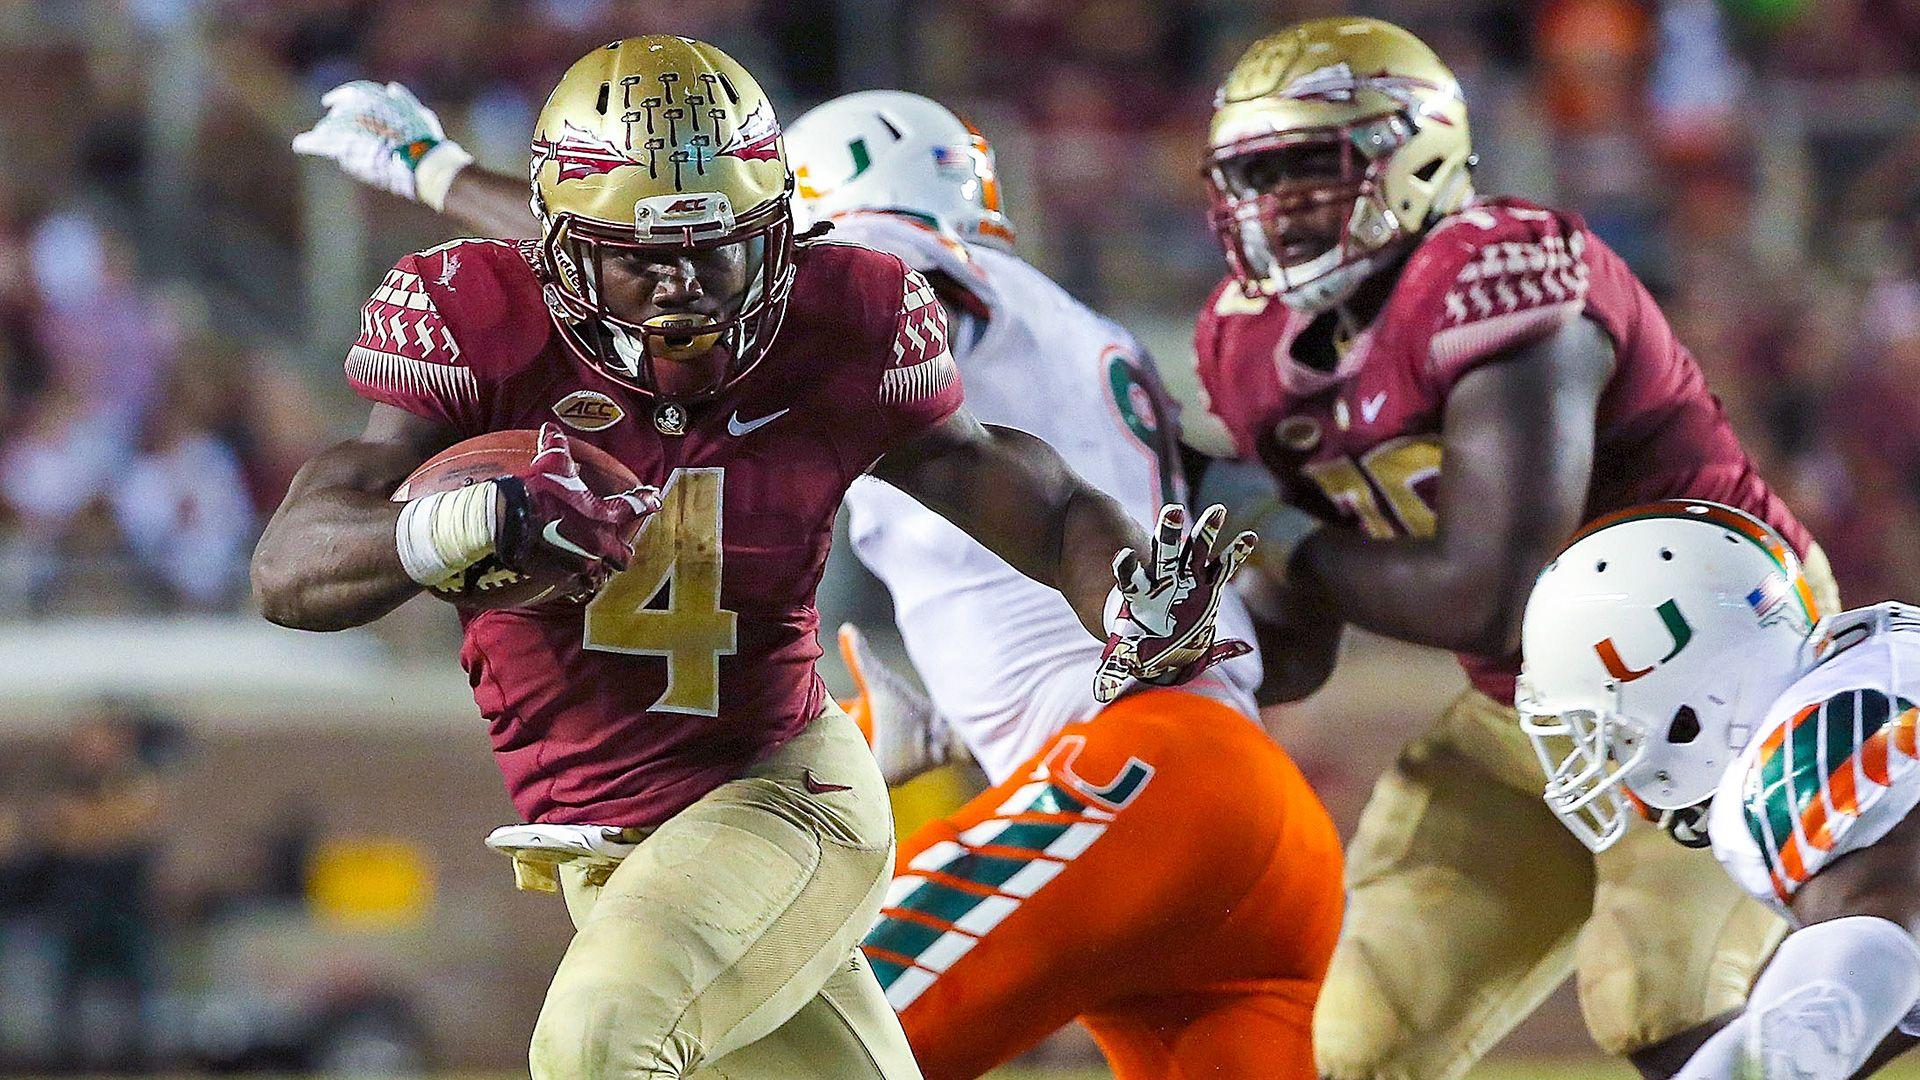 Florida State's Dalvin Cook will again be a pest for defenses